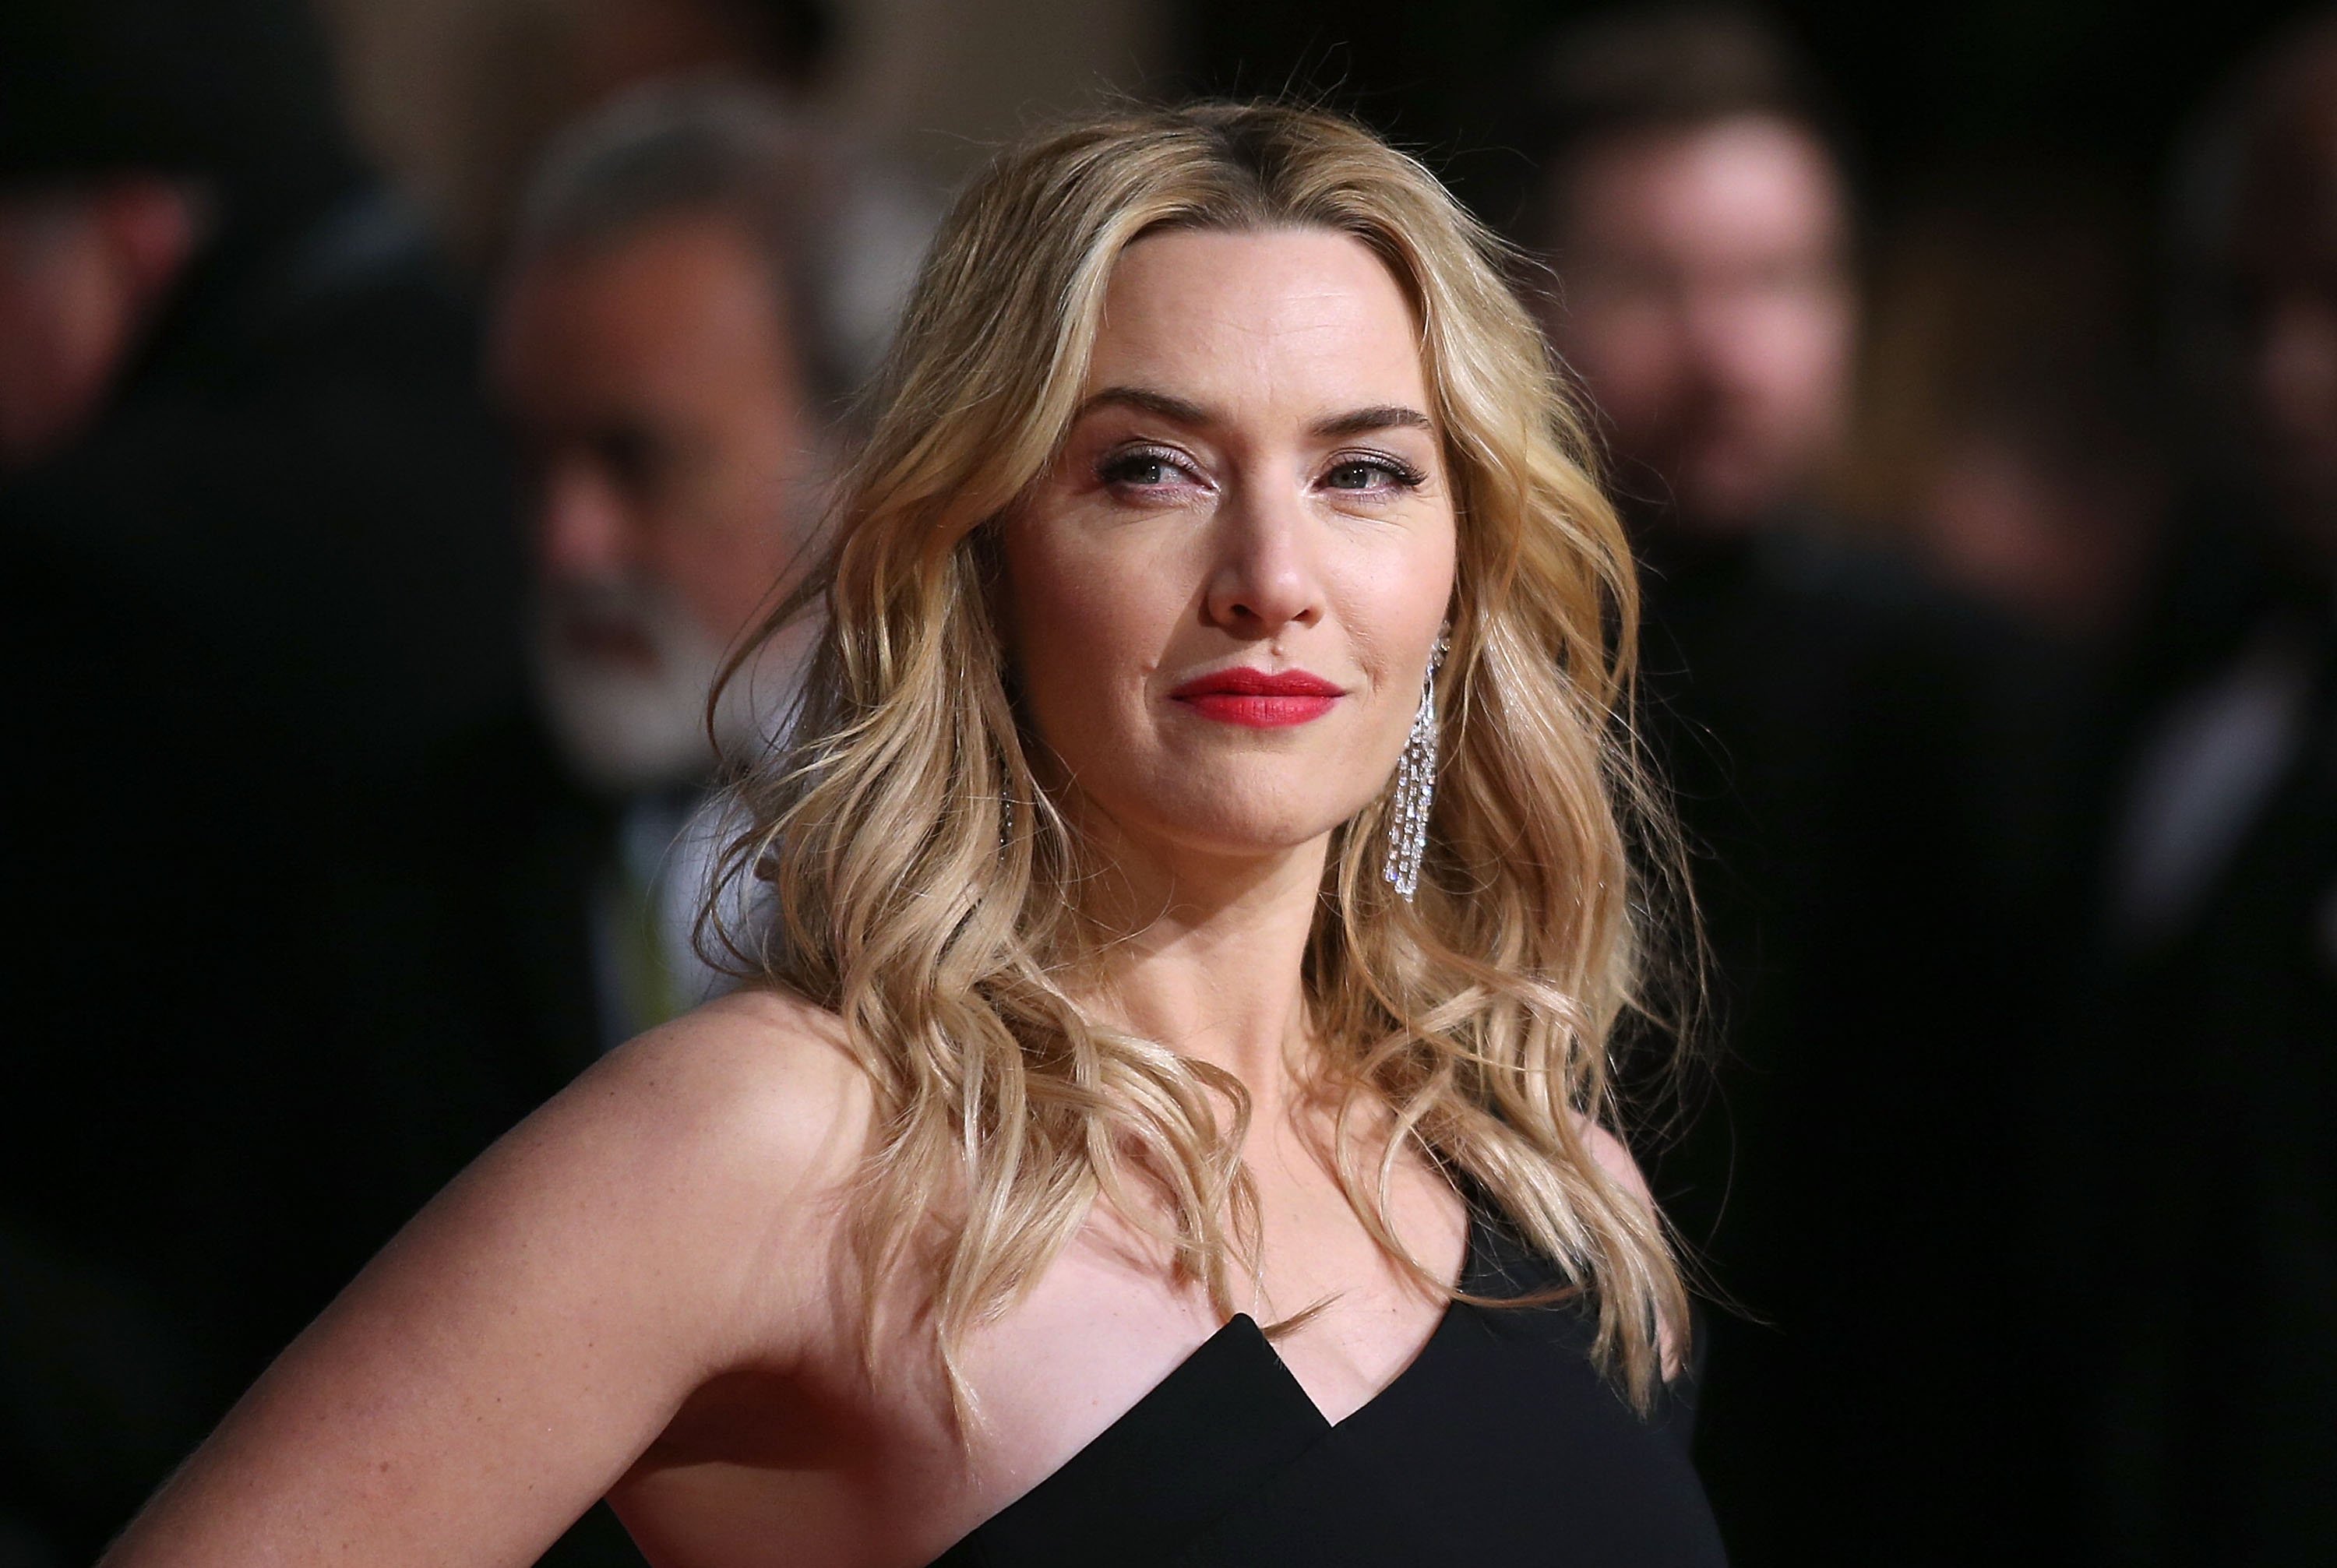 Emmys 2021 award winner Kate Winslet, star of James Cameron's movie proudly poses for the cameras nearly two decades after Titanic premiered